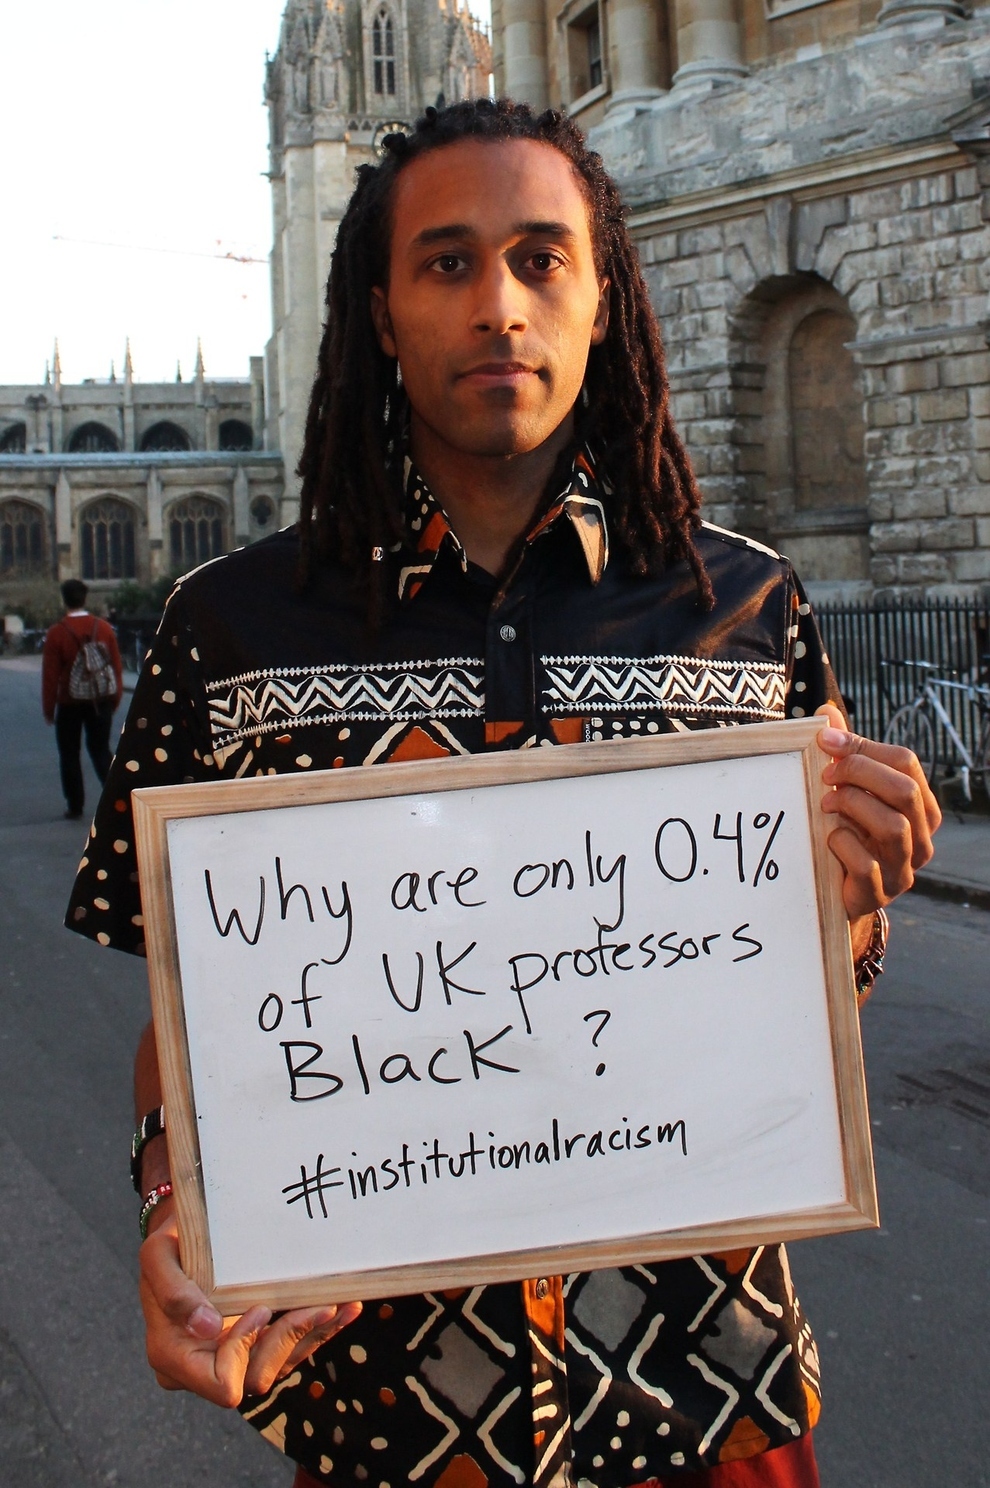 the radcliffe camera - Why are only 0.4% of uk professors Black' ?